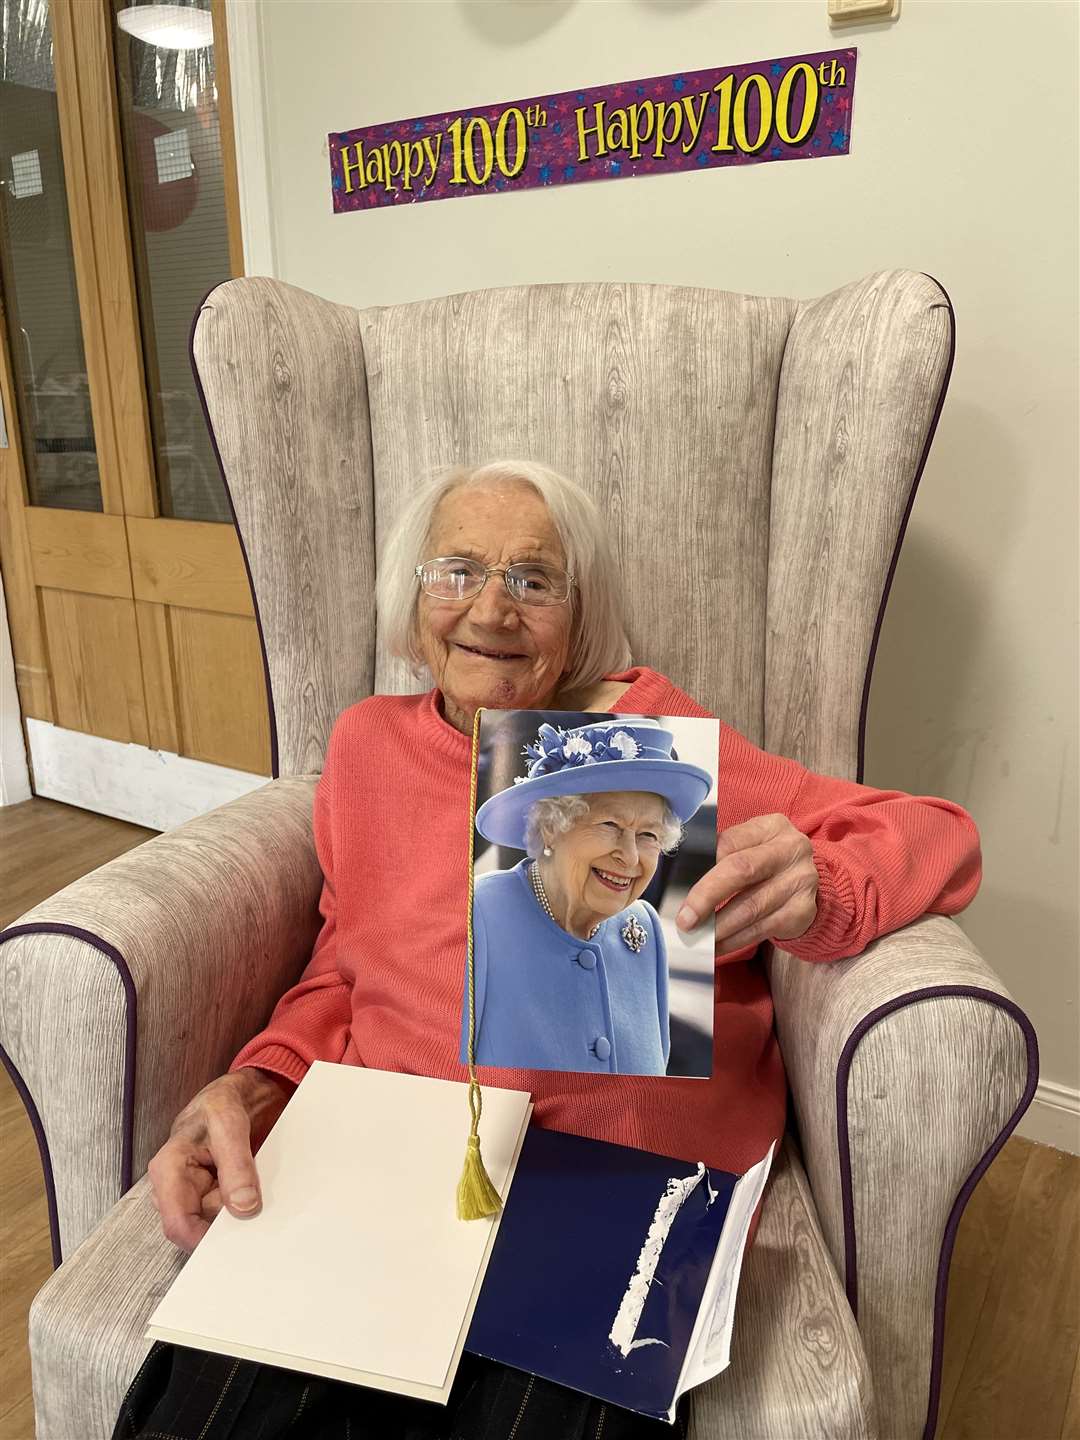 Elizabeth McMillan opening a birthday card from The Queen to mark her 100th birthday